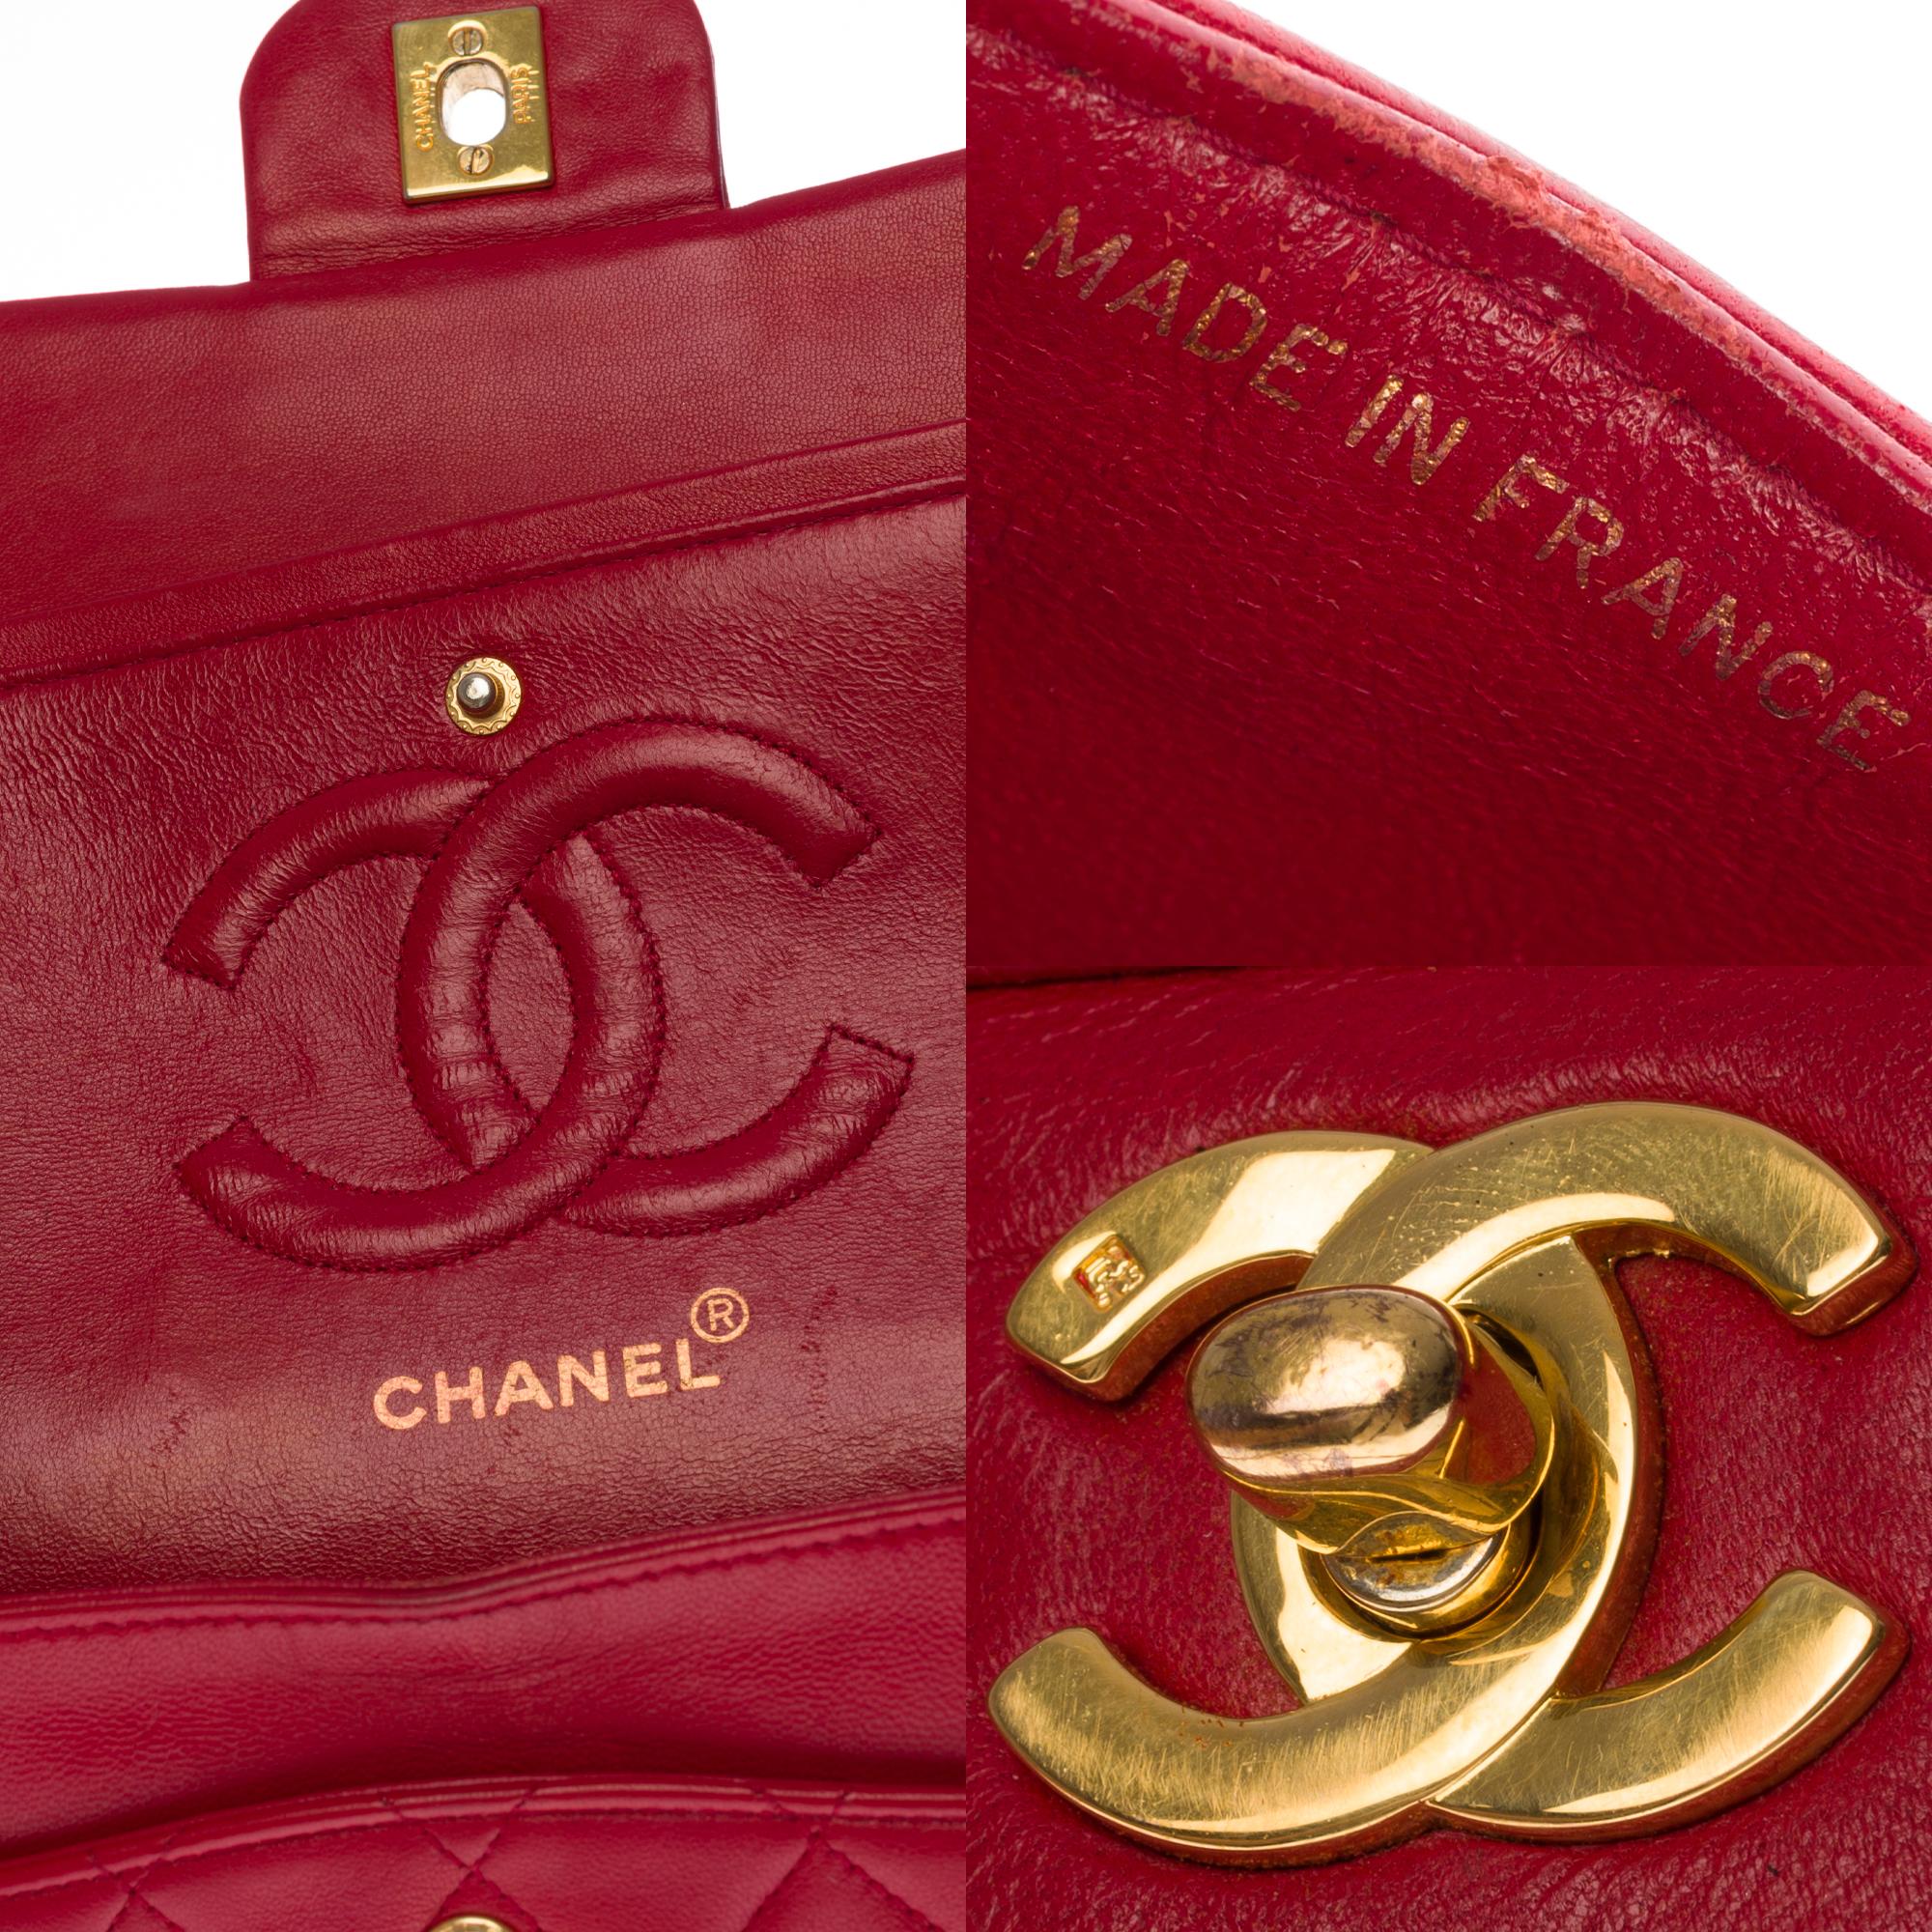 Chanel Timeless Medium double flap Shoulder bag in Red quilted leather, GHW 1